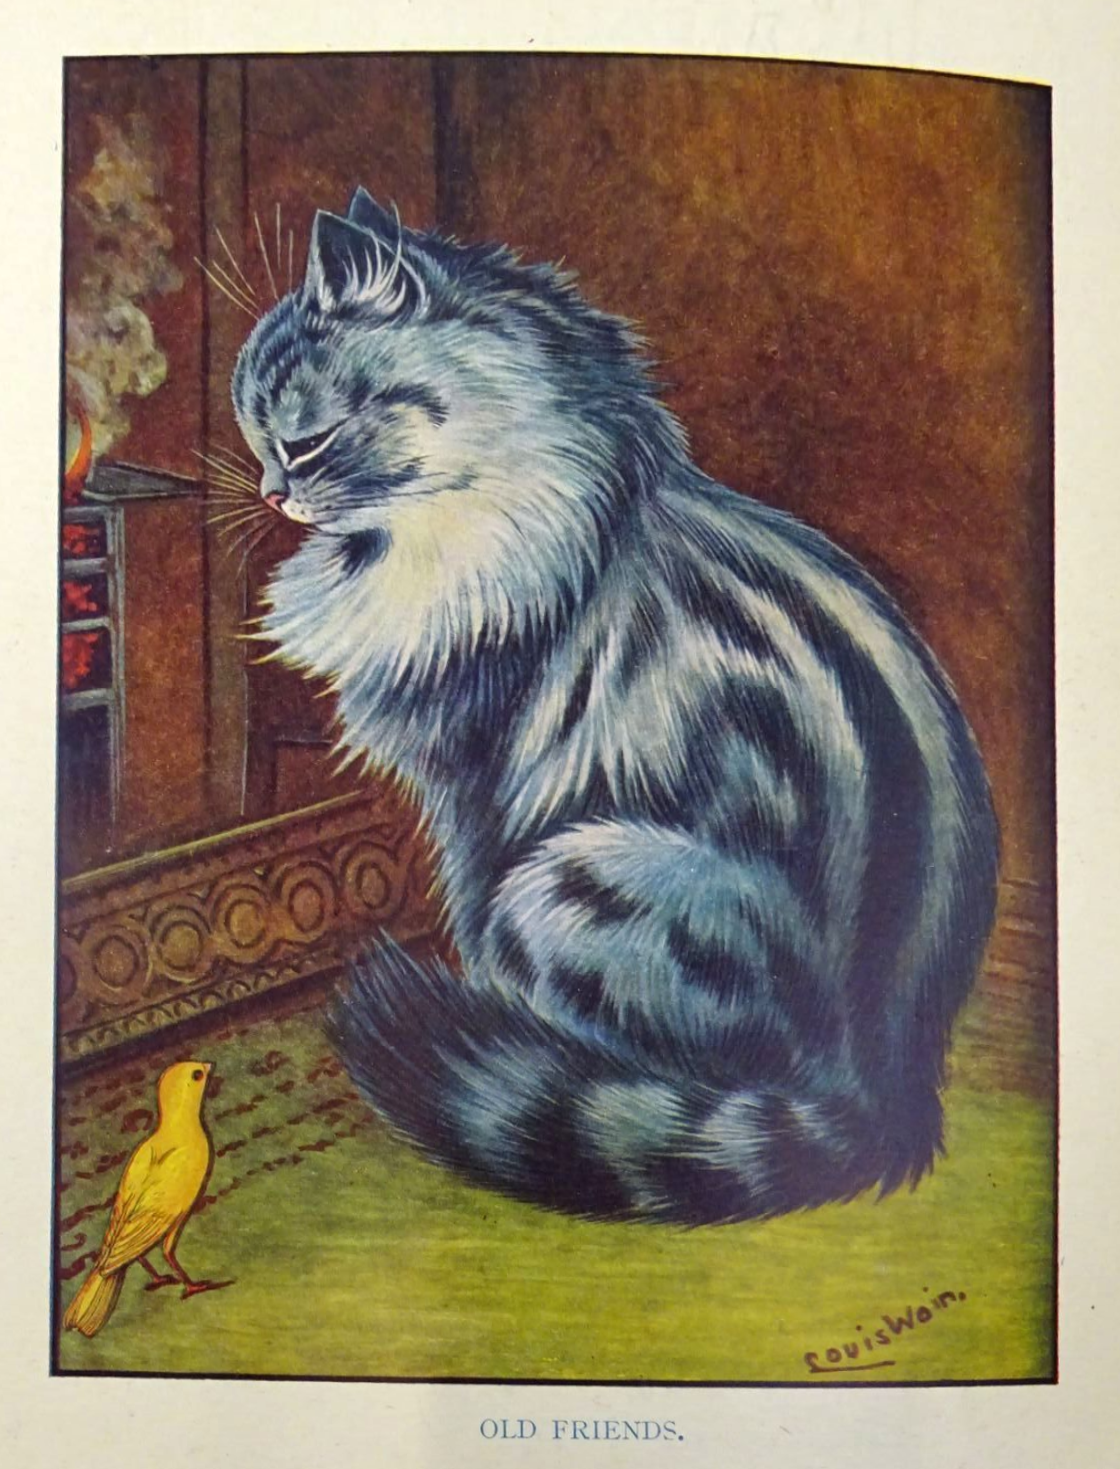 Louis Wain illustration with: 1923, 2subjects, bird, bird:Canary, book, book:unknown, caption, cat, cat:tabby, color:blue, color:yellow, indoors, profile, realistic, signature